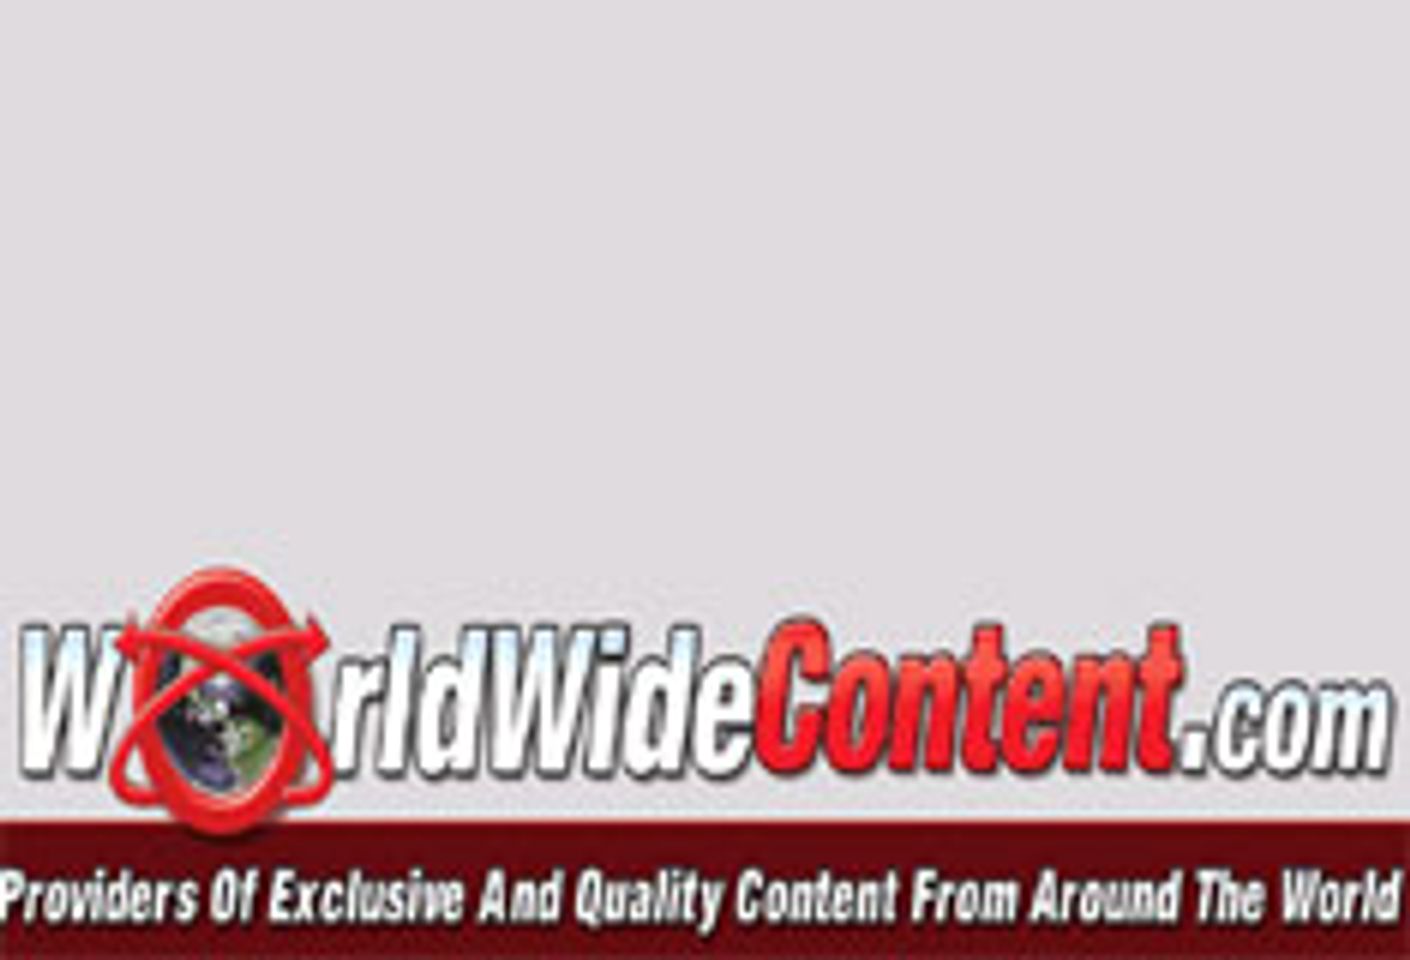 World Wide Content Launched